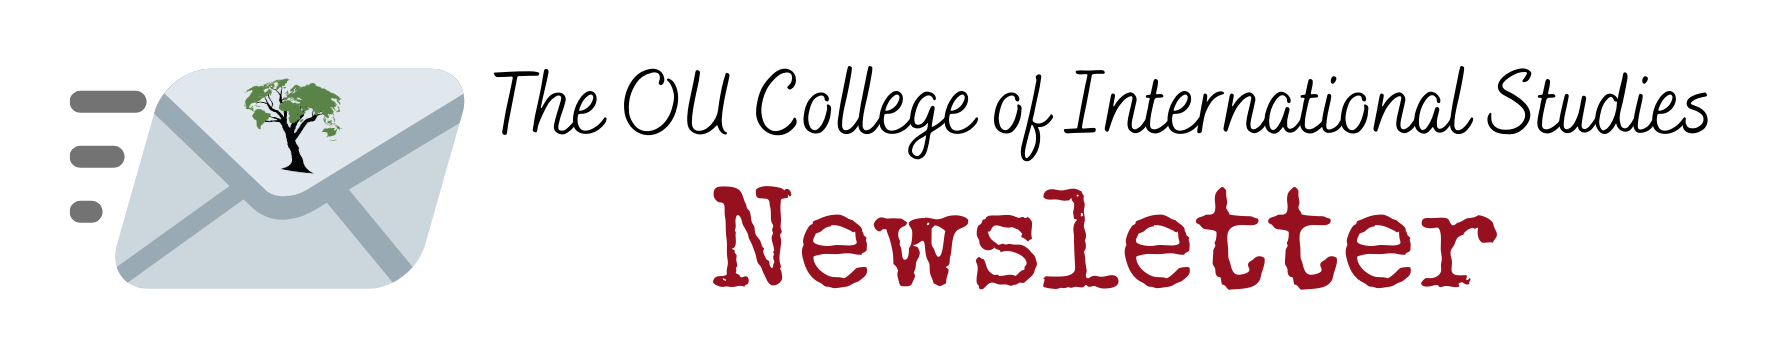 The OU College of International Studies Newsletter